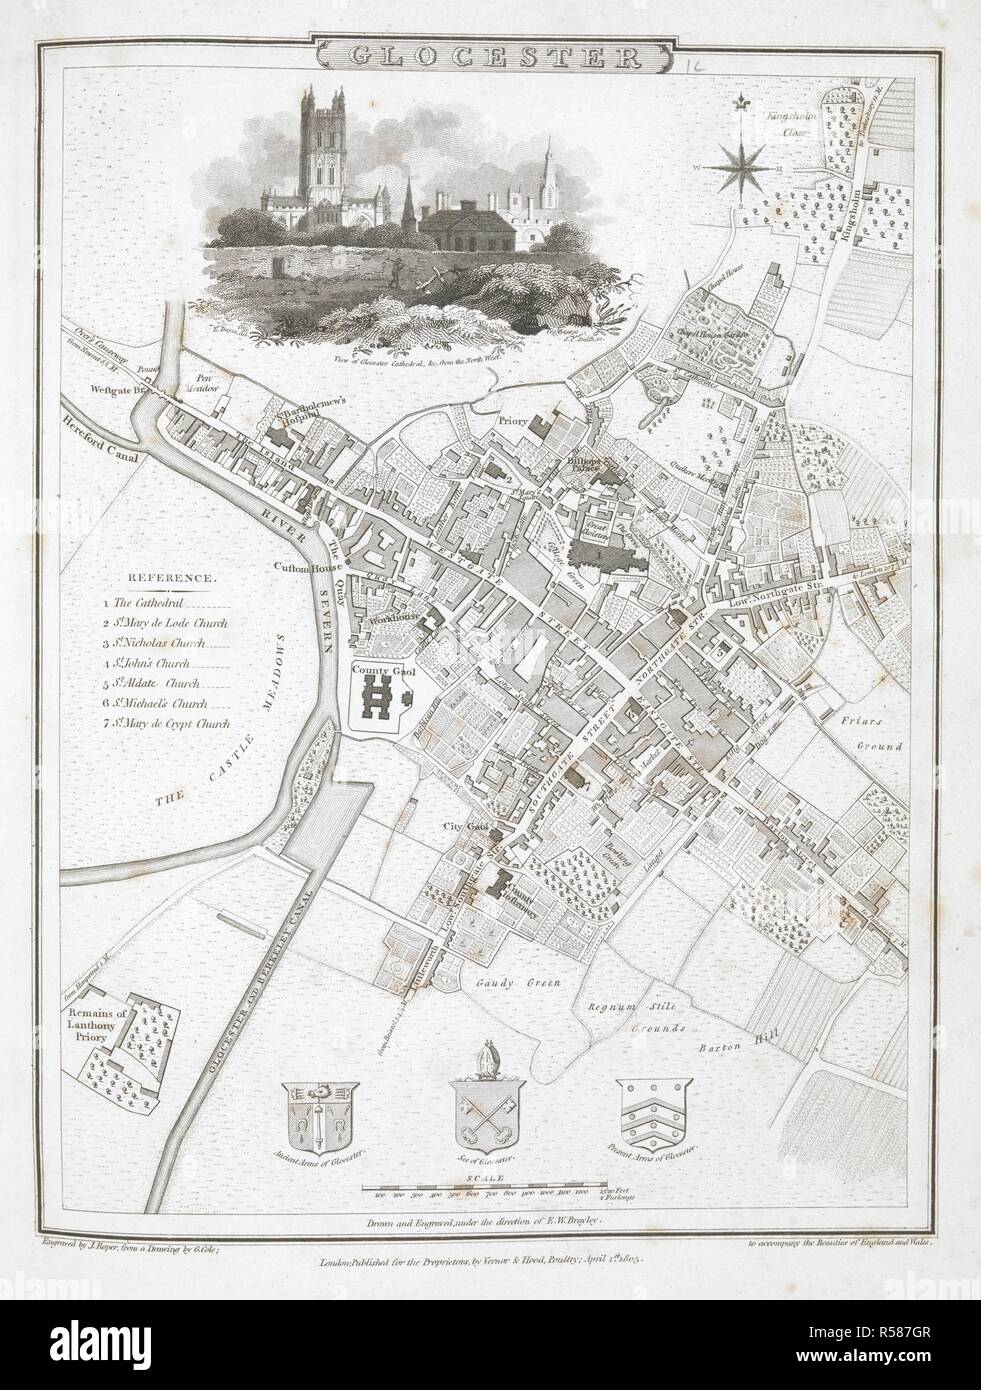 A plan of Gloucester. Glocester. Scale, 1320 feet[ = 48 mm.] ... Engraved by J. Roper, from a drawing by G. Cole ... 1805. London : Vernor, Hood, and Sharpe, 1810. Source: Maps 11.b.3, page 71. Language: English. Stock Photo